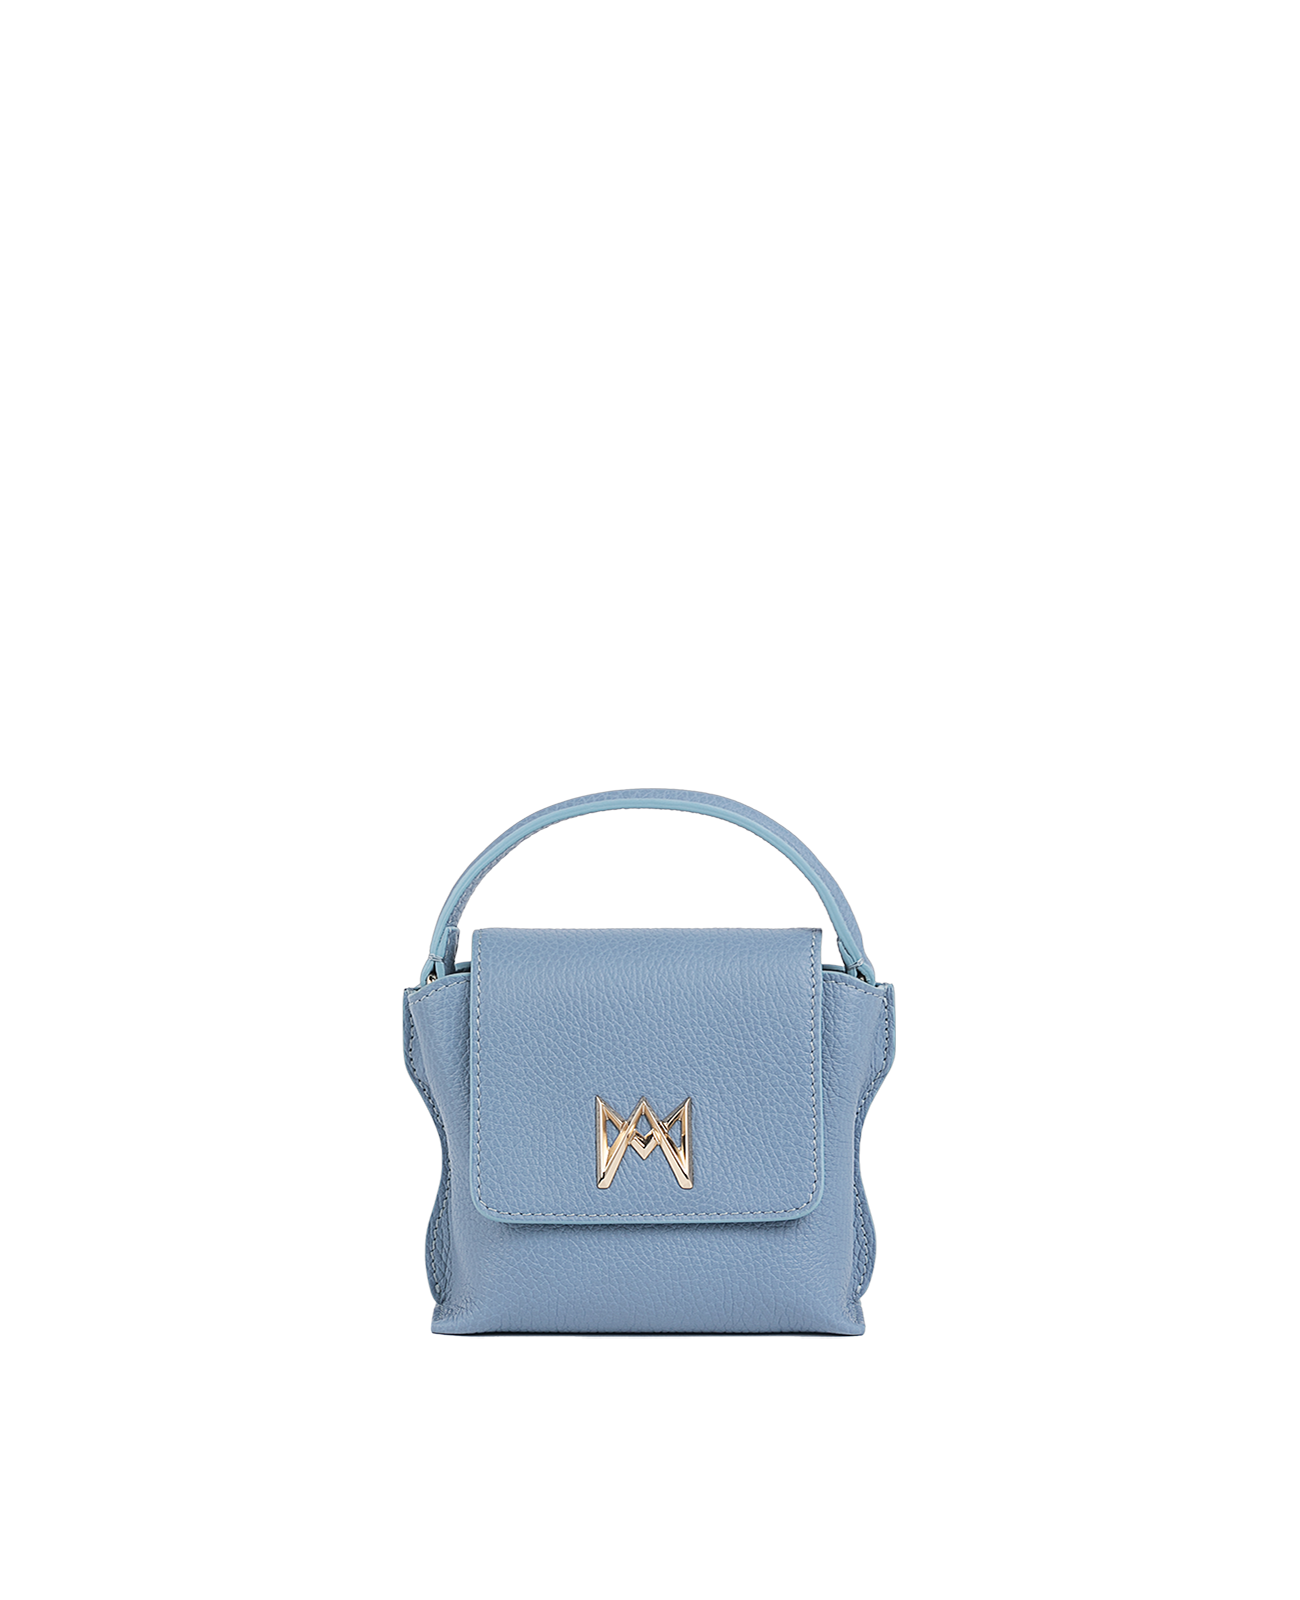 Cross-body bag in Italian full-grain leather, semi-aniline calf Italian leather with detachable shoulder strap.Three compartments, zip pocket in the back compartment. Magnetic flap closure with logo. Color: Baby Blue. Size:Mini